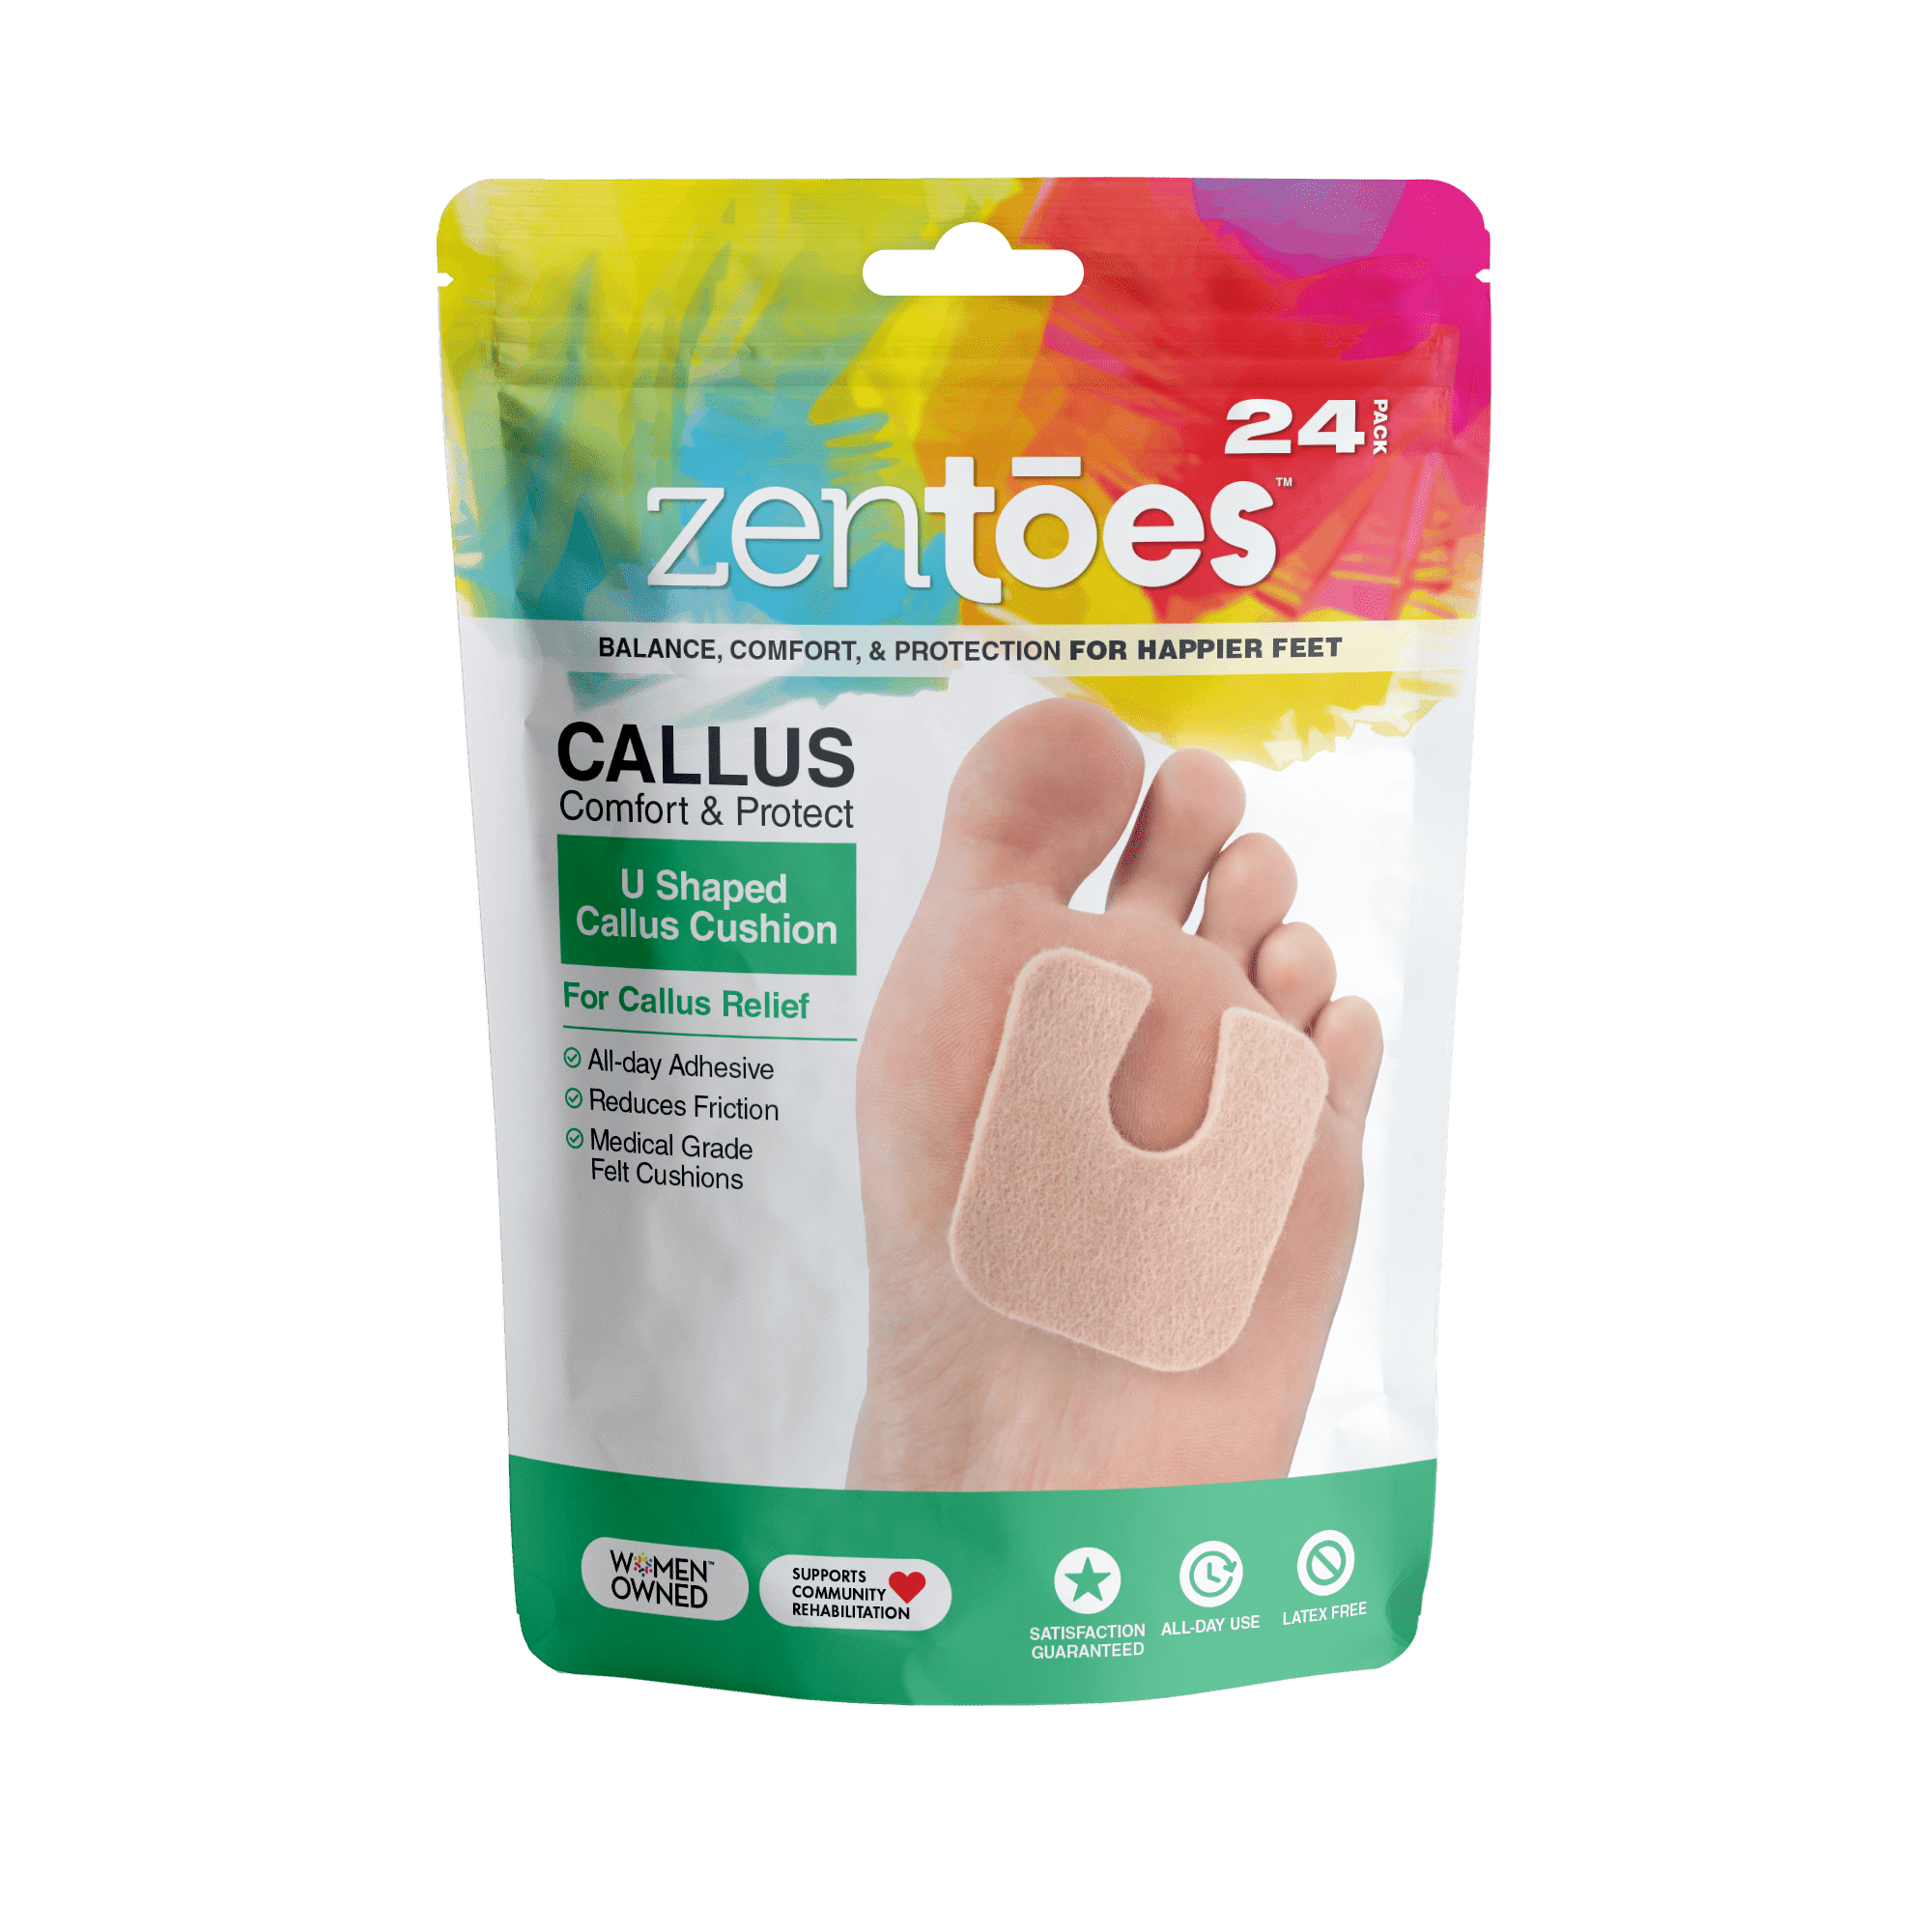 Amazon.com: Ajoysoul Upgraded Toe Callus Pad - 6 Packs Form Blister Pads  with Elastic Band - Callus Cushion for Corn, Callus, Blister, Friction  between Toe and Shoe : Health & Household